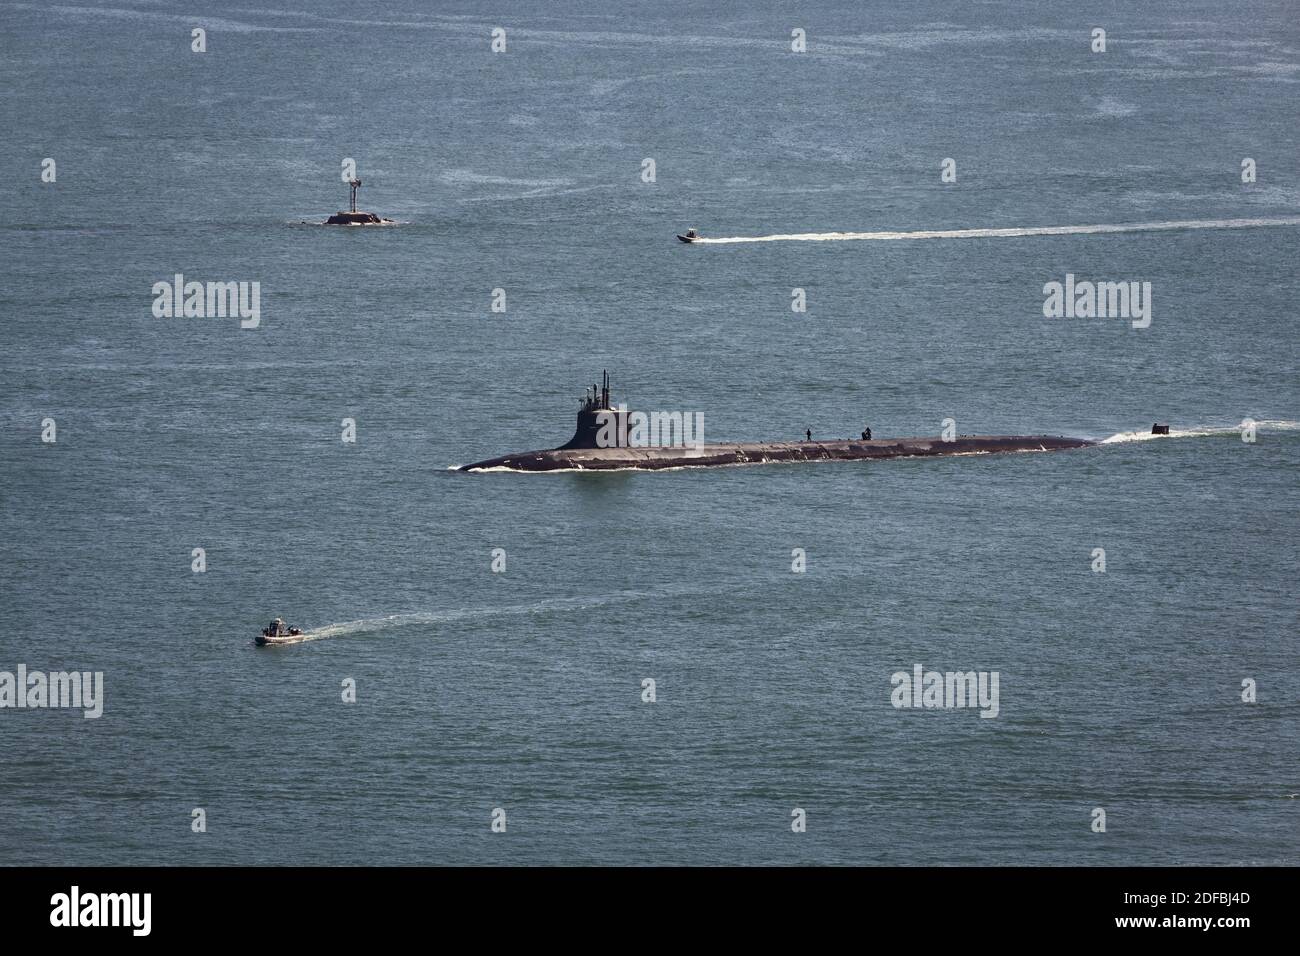 A US Navy submarine enters the breakwater at the harbor in San Diego, California. Stock Photo